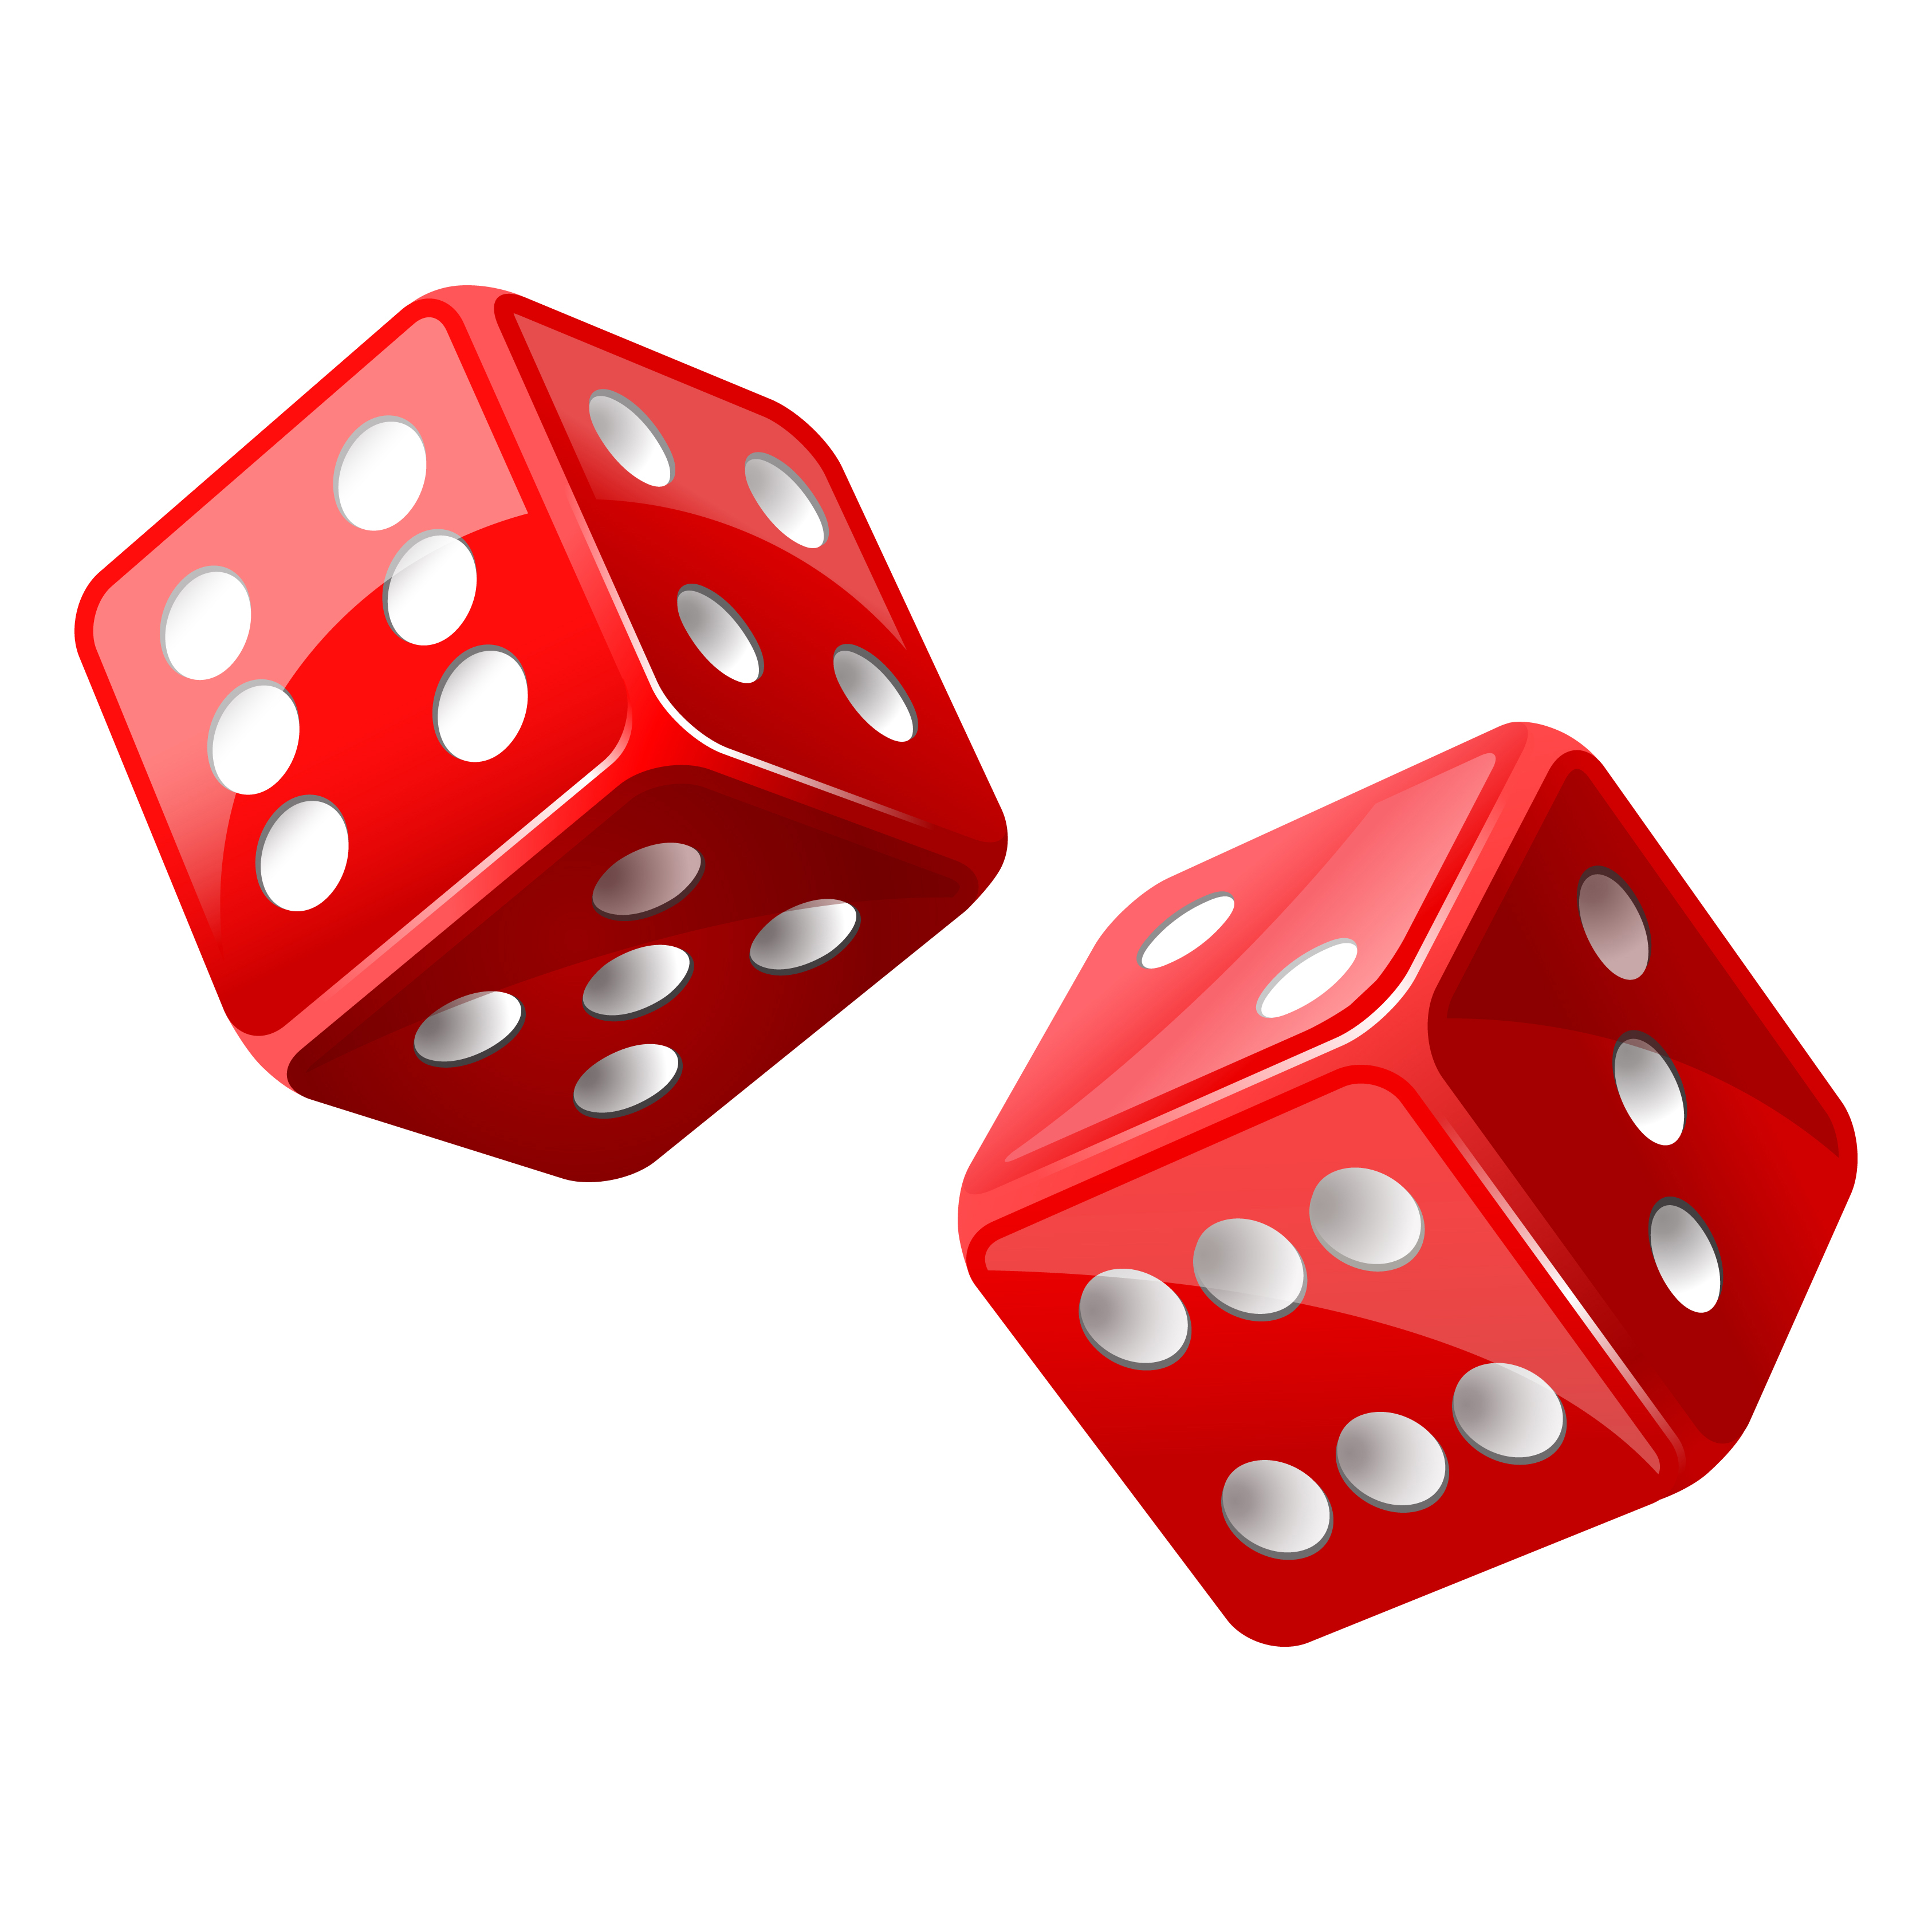 Pics For > Dice Png